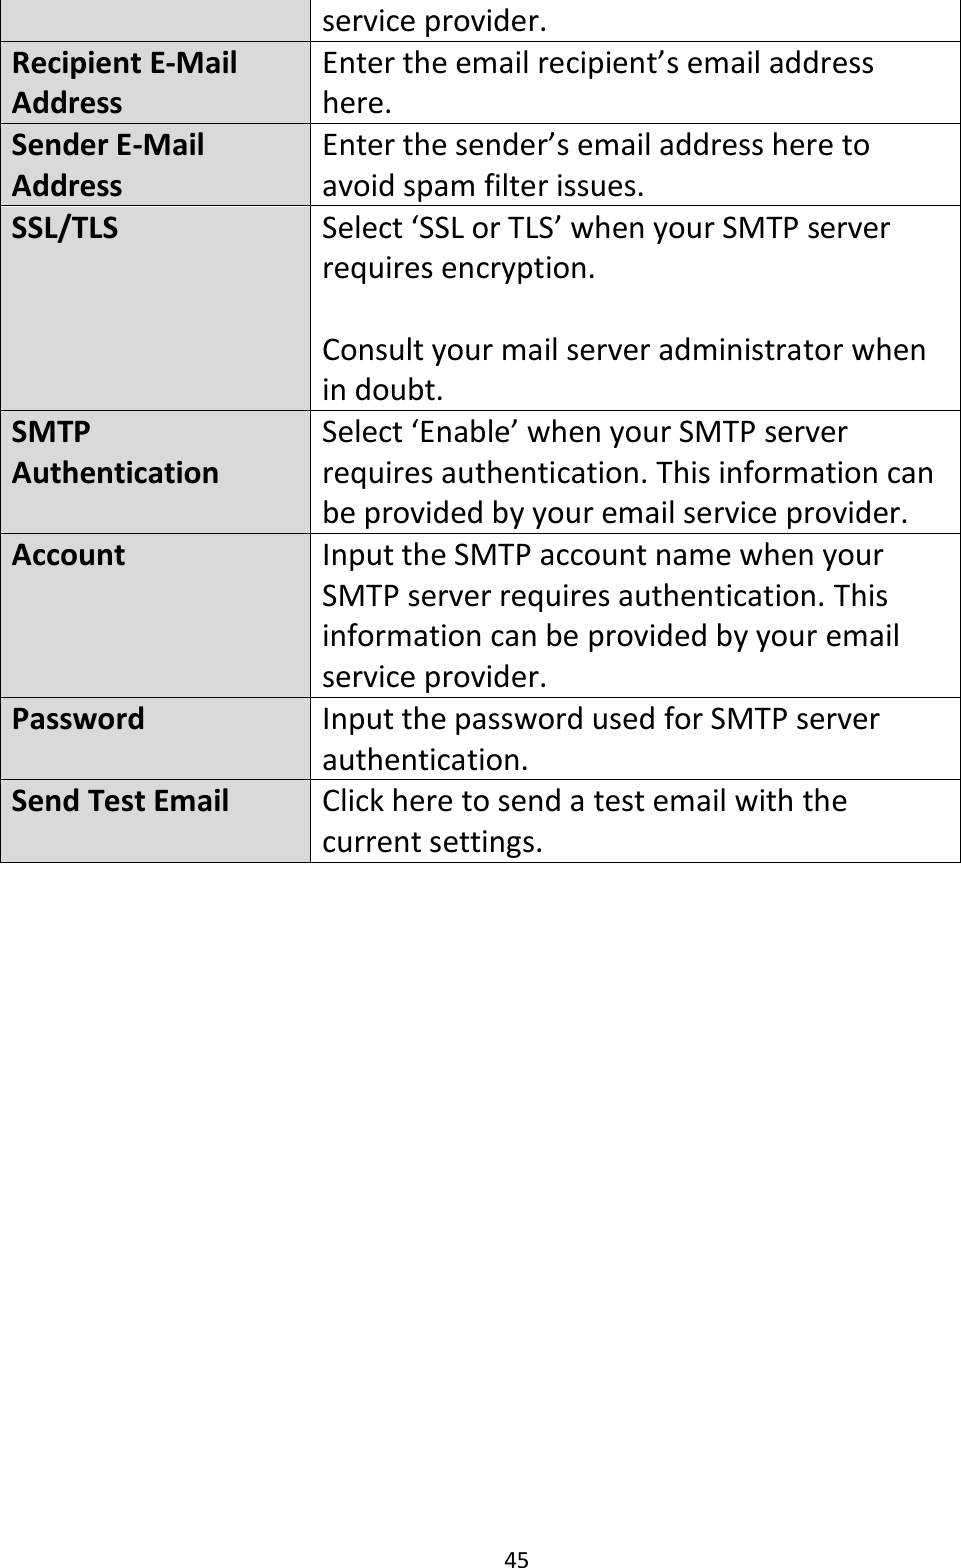 45  service provider. Recipient E-Mail Address Enter the email recipient’s email address here. Sender E-Mail Address Enter the sender’s email address here to avoid spam filter issues. SSL/TLS Select ‘SSL or TLS’ when your SMTP server requires encryption.   Consult your mail server administrator when in doubt. SMTP Authentication Select ‘Enable’ when your SMTP server requires authentication. This information can be provided by your email service provider. Account Input the SMTP account name when your SMTP server requires authentication. This information can be provided by your email service provider. Password Input the password used for SMTP server authentication. Send Test Email Click here to send a test email with the current settings.   